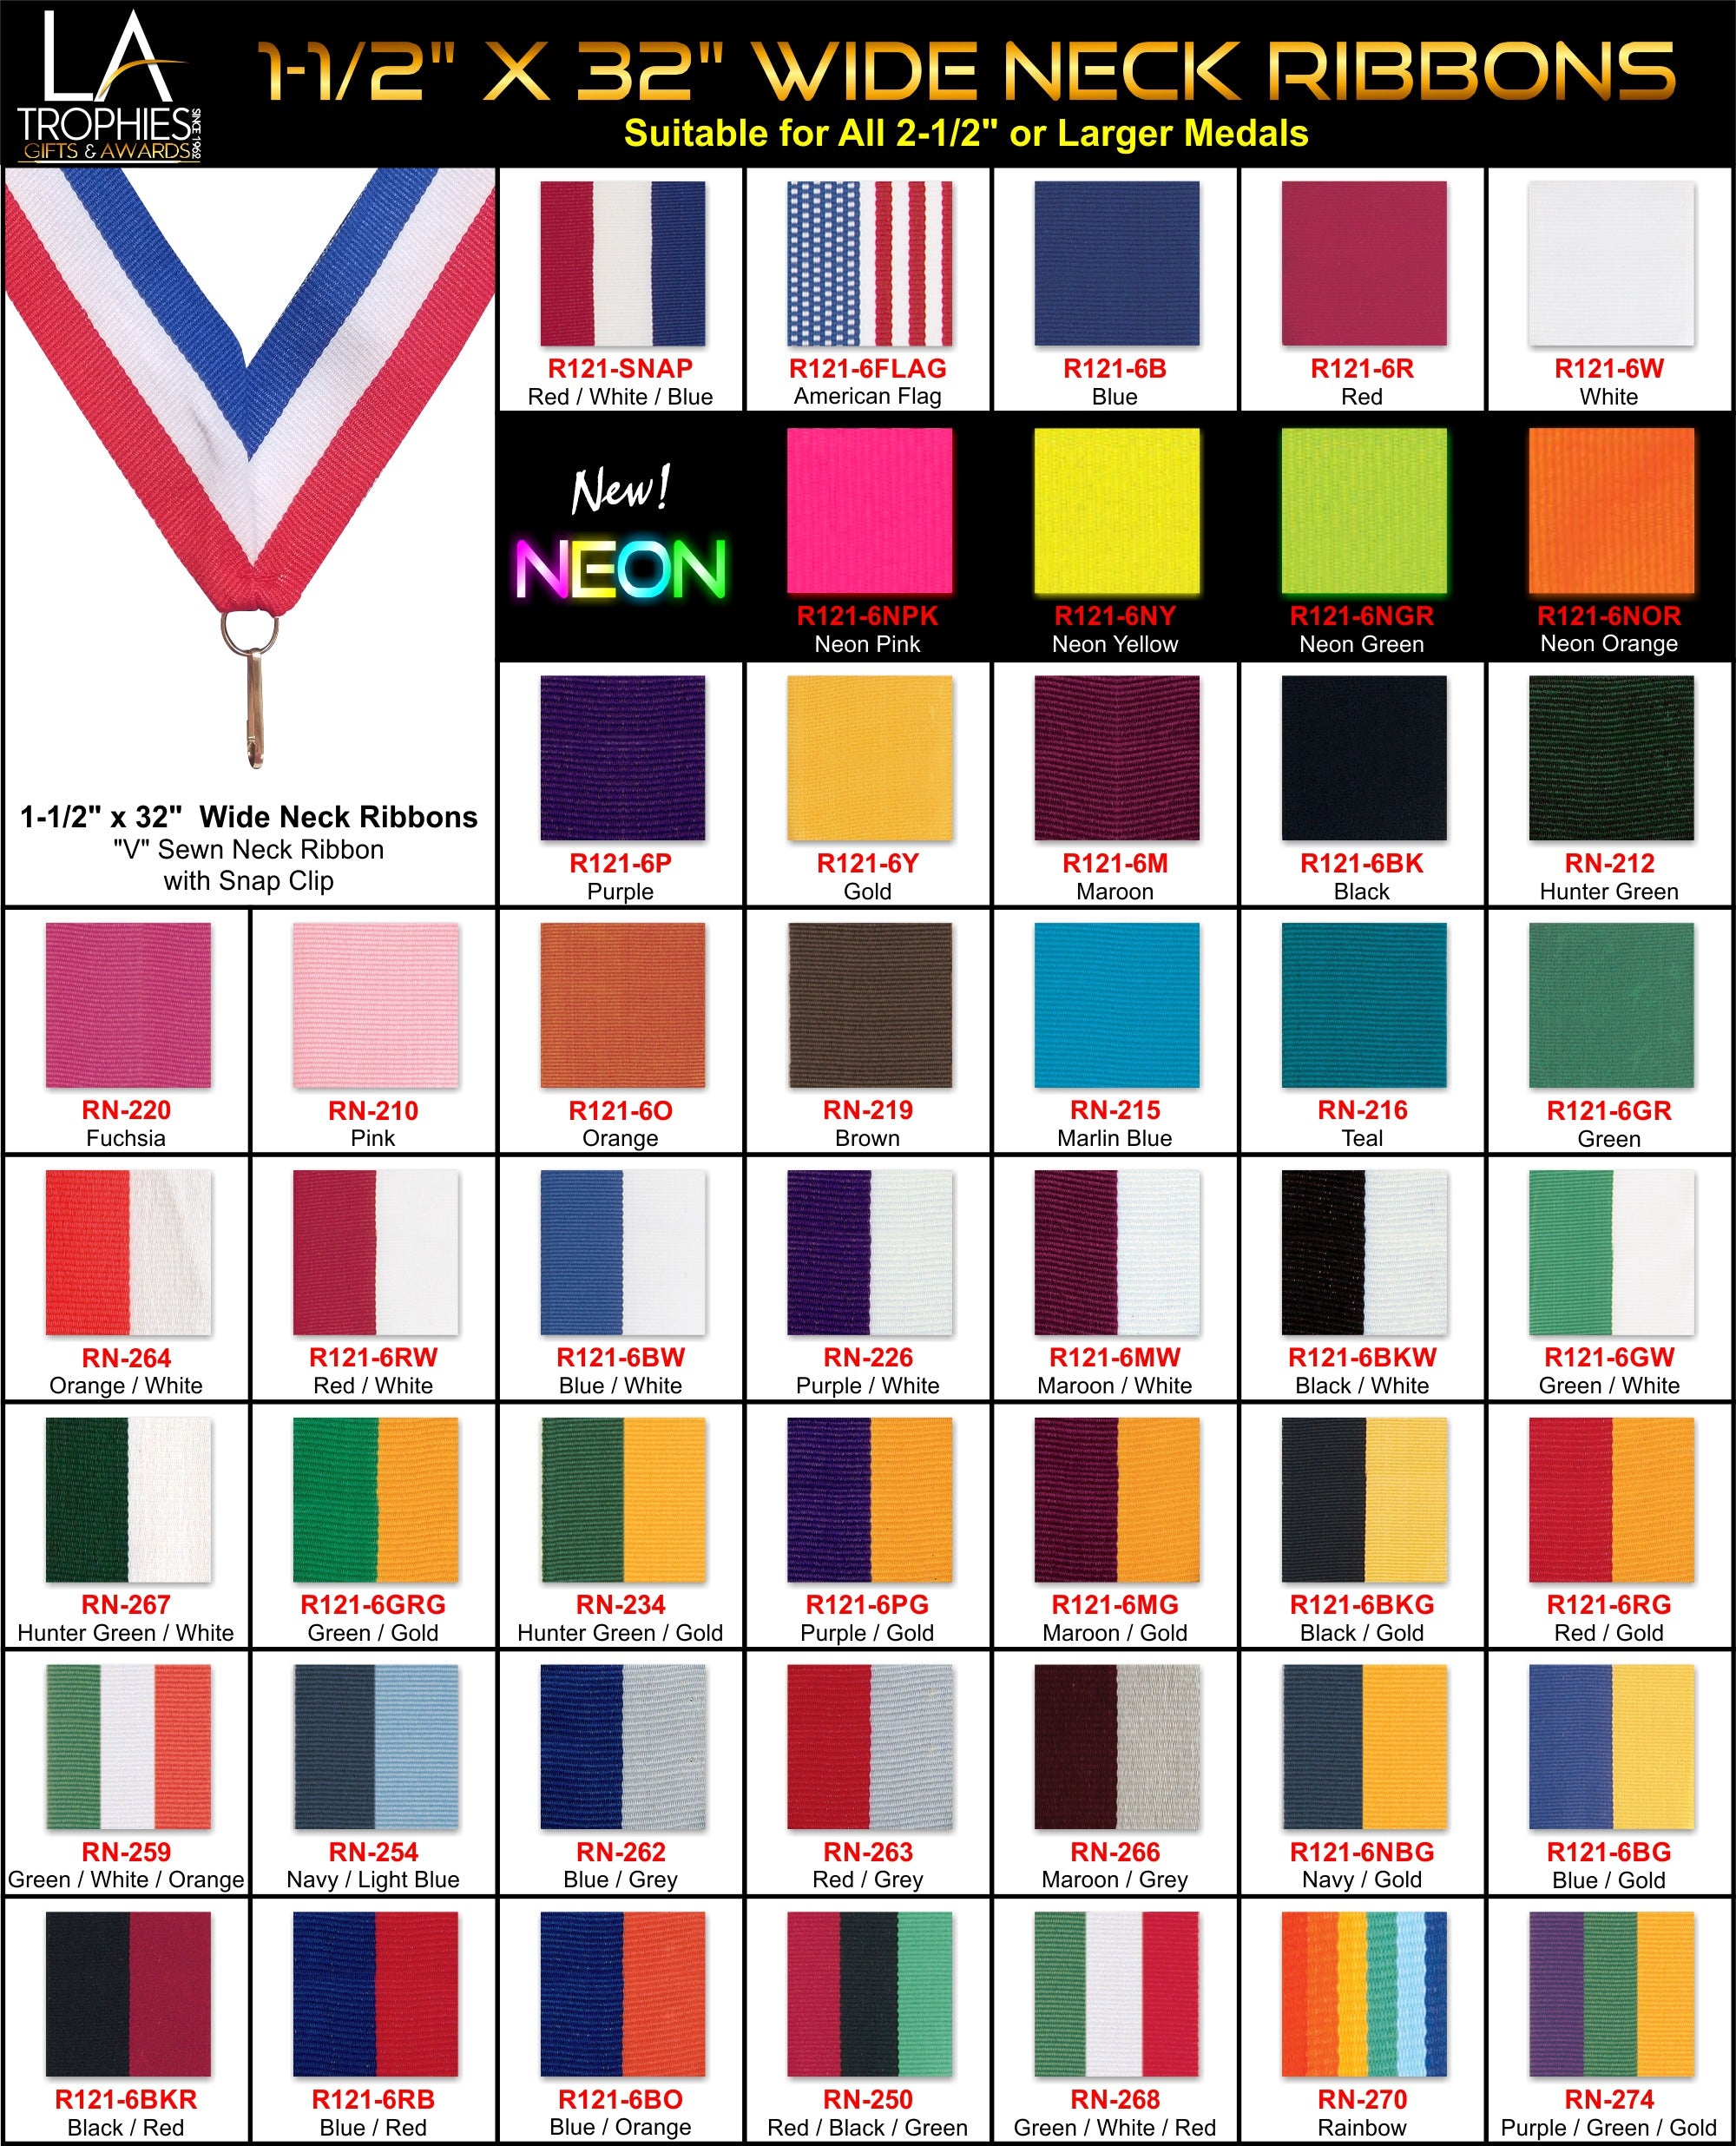 1-1/2" Wide Neck Ribbons for Medals 2-1/2" and Larger